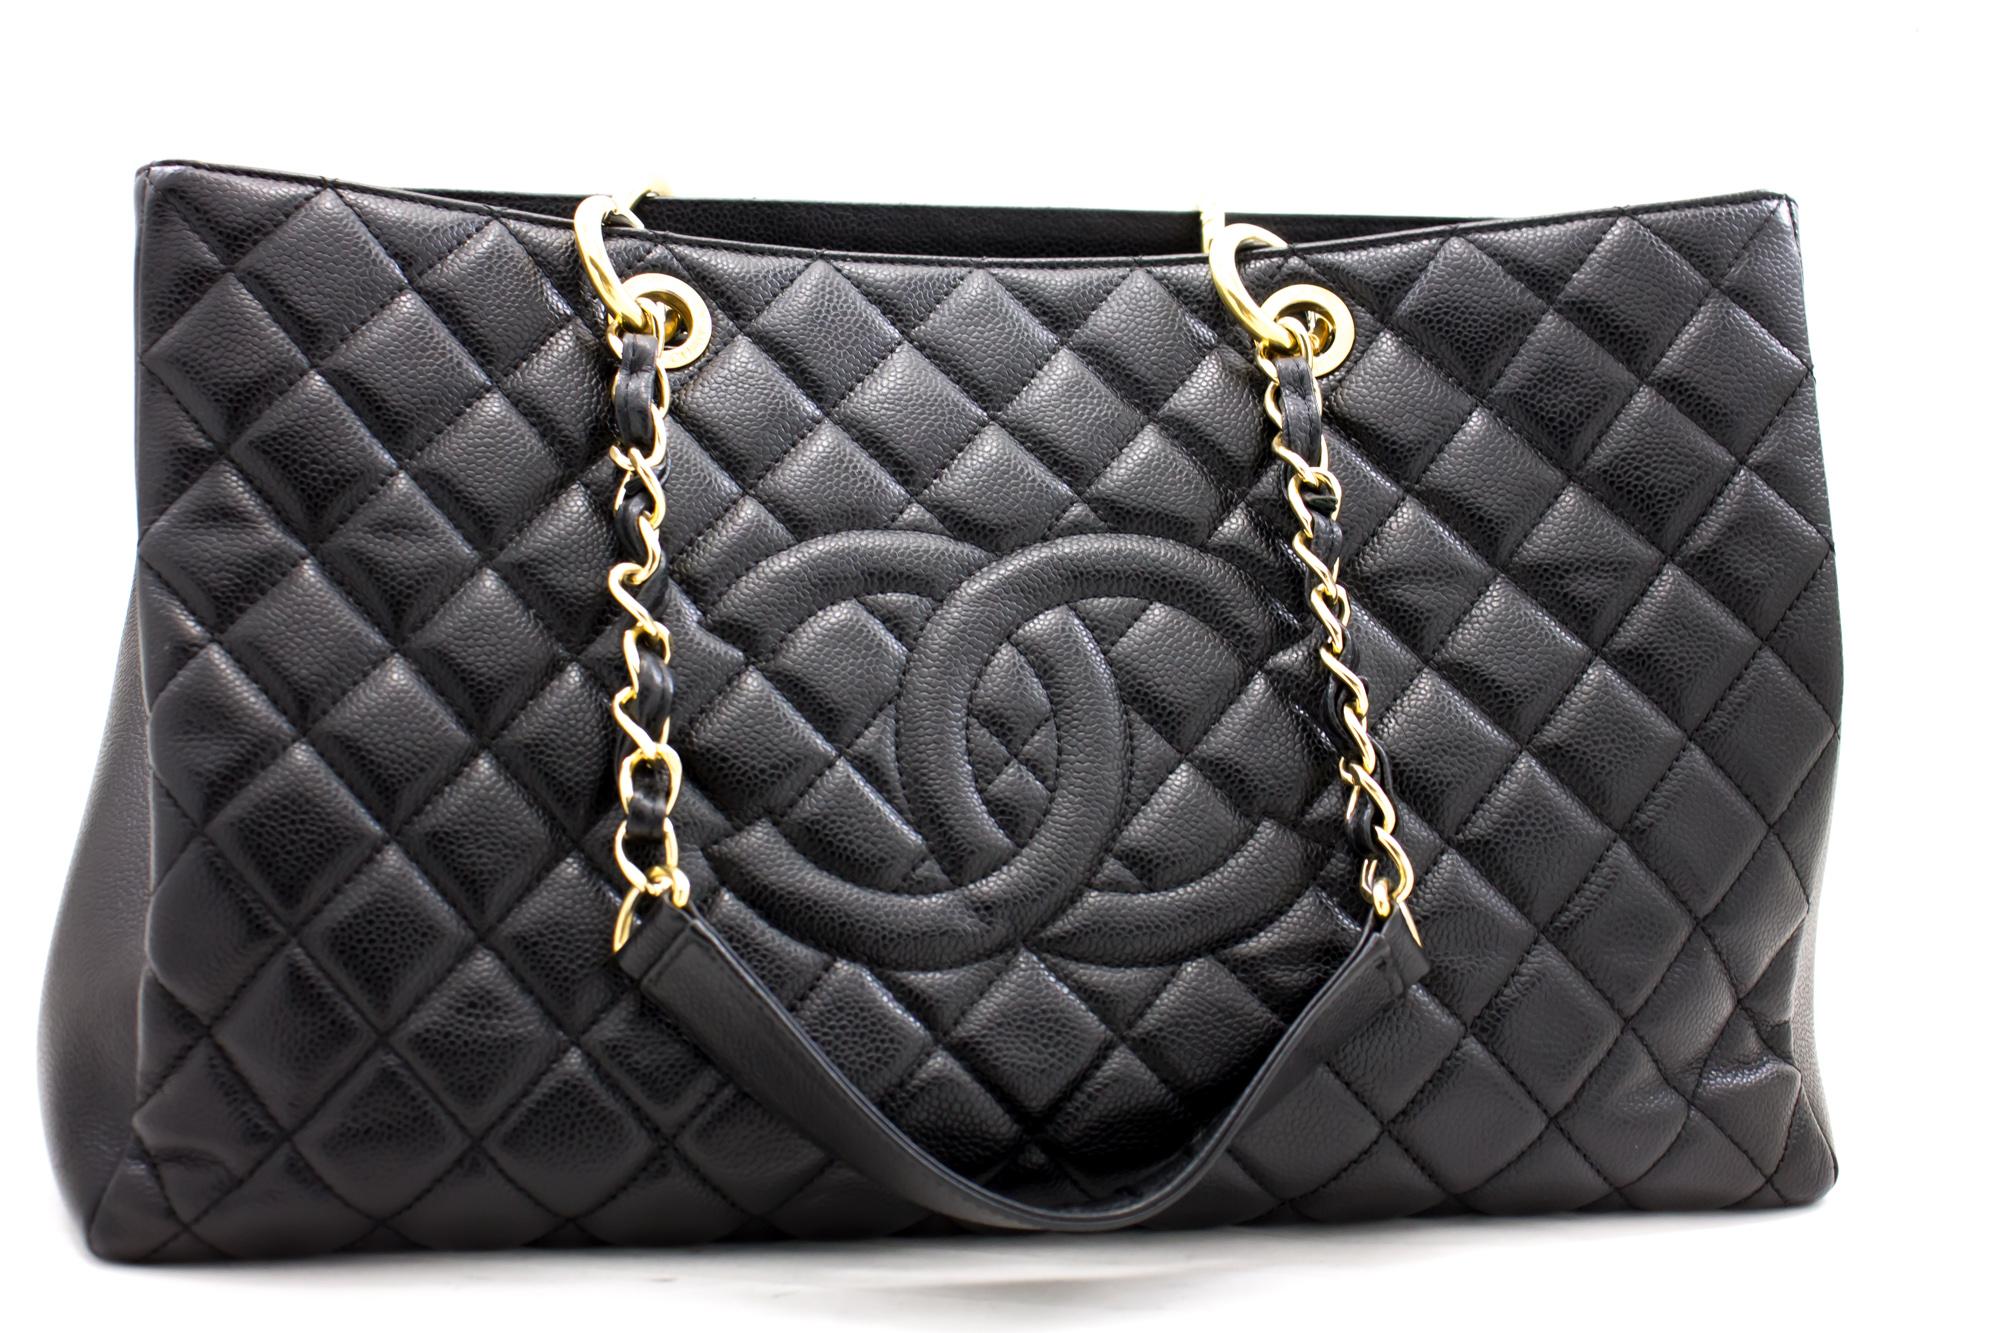 An authentic CHANEL Caviar GST Grand Shopping Tote Chain Shoulder Bag Black. The color is Black. The outside material is Leather. The pattern is Solid. This item is Contemporary. The year of manufacture would be 2013.
Conditions & Ratings
Outside